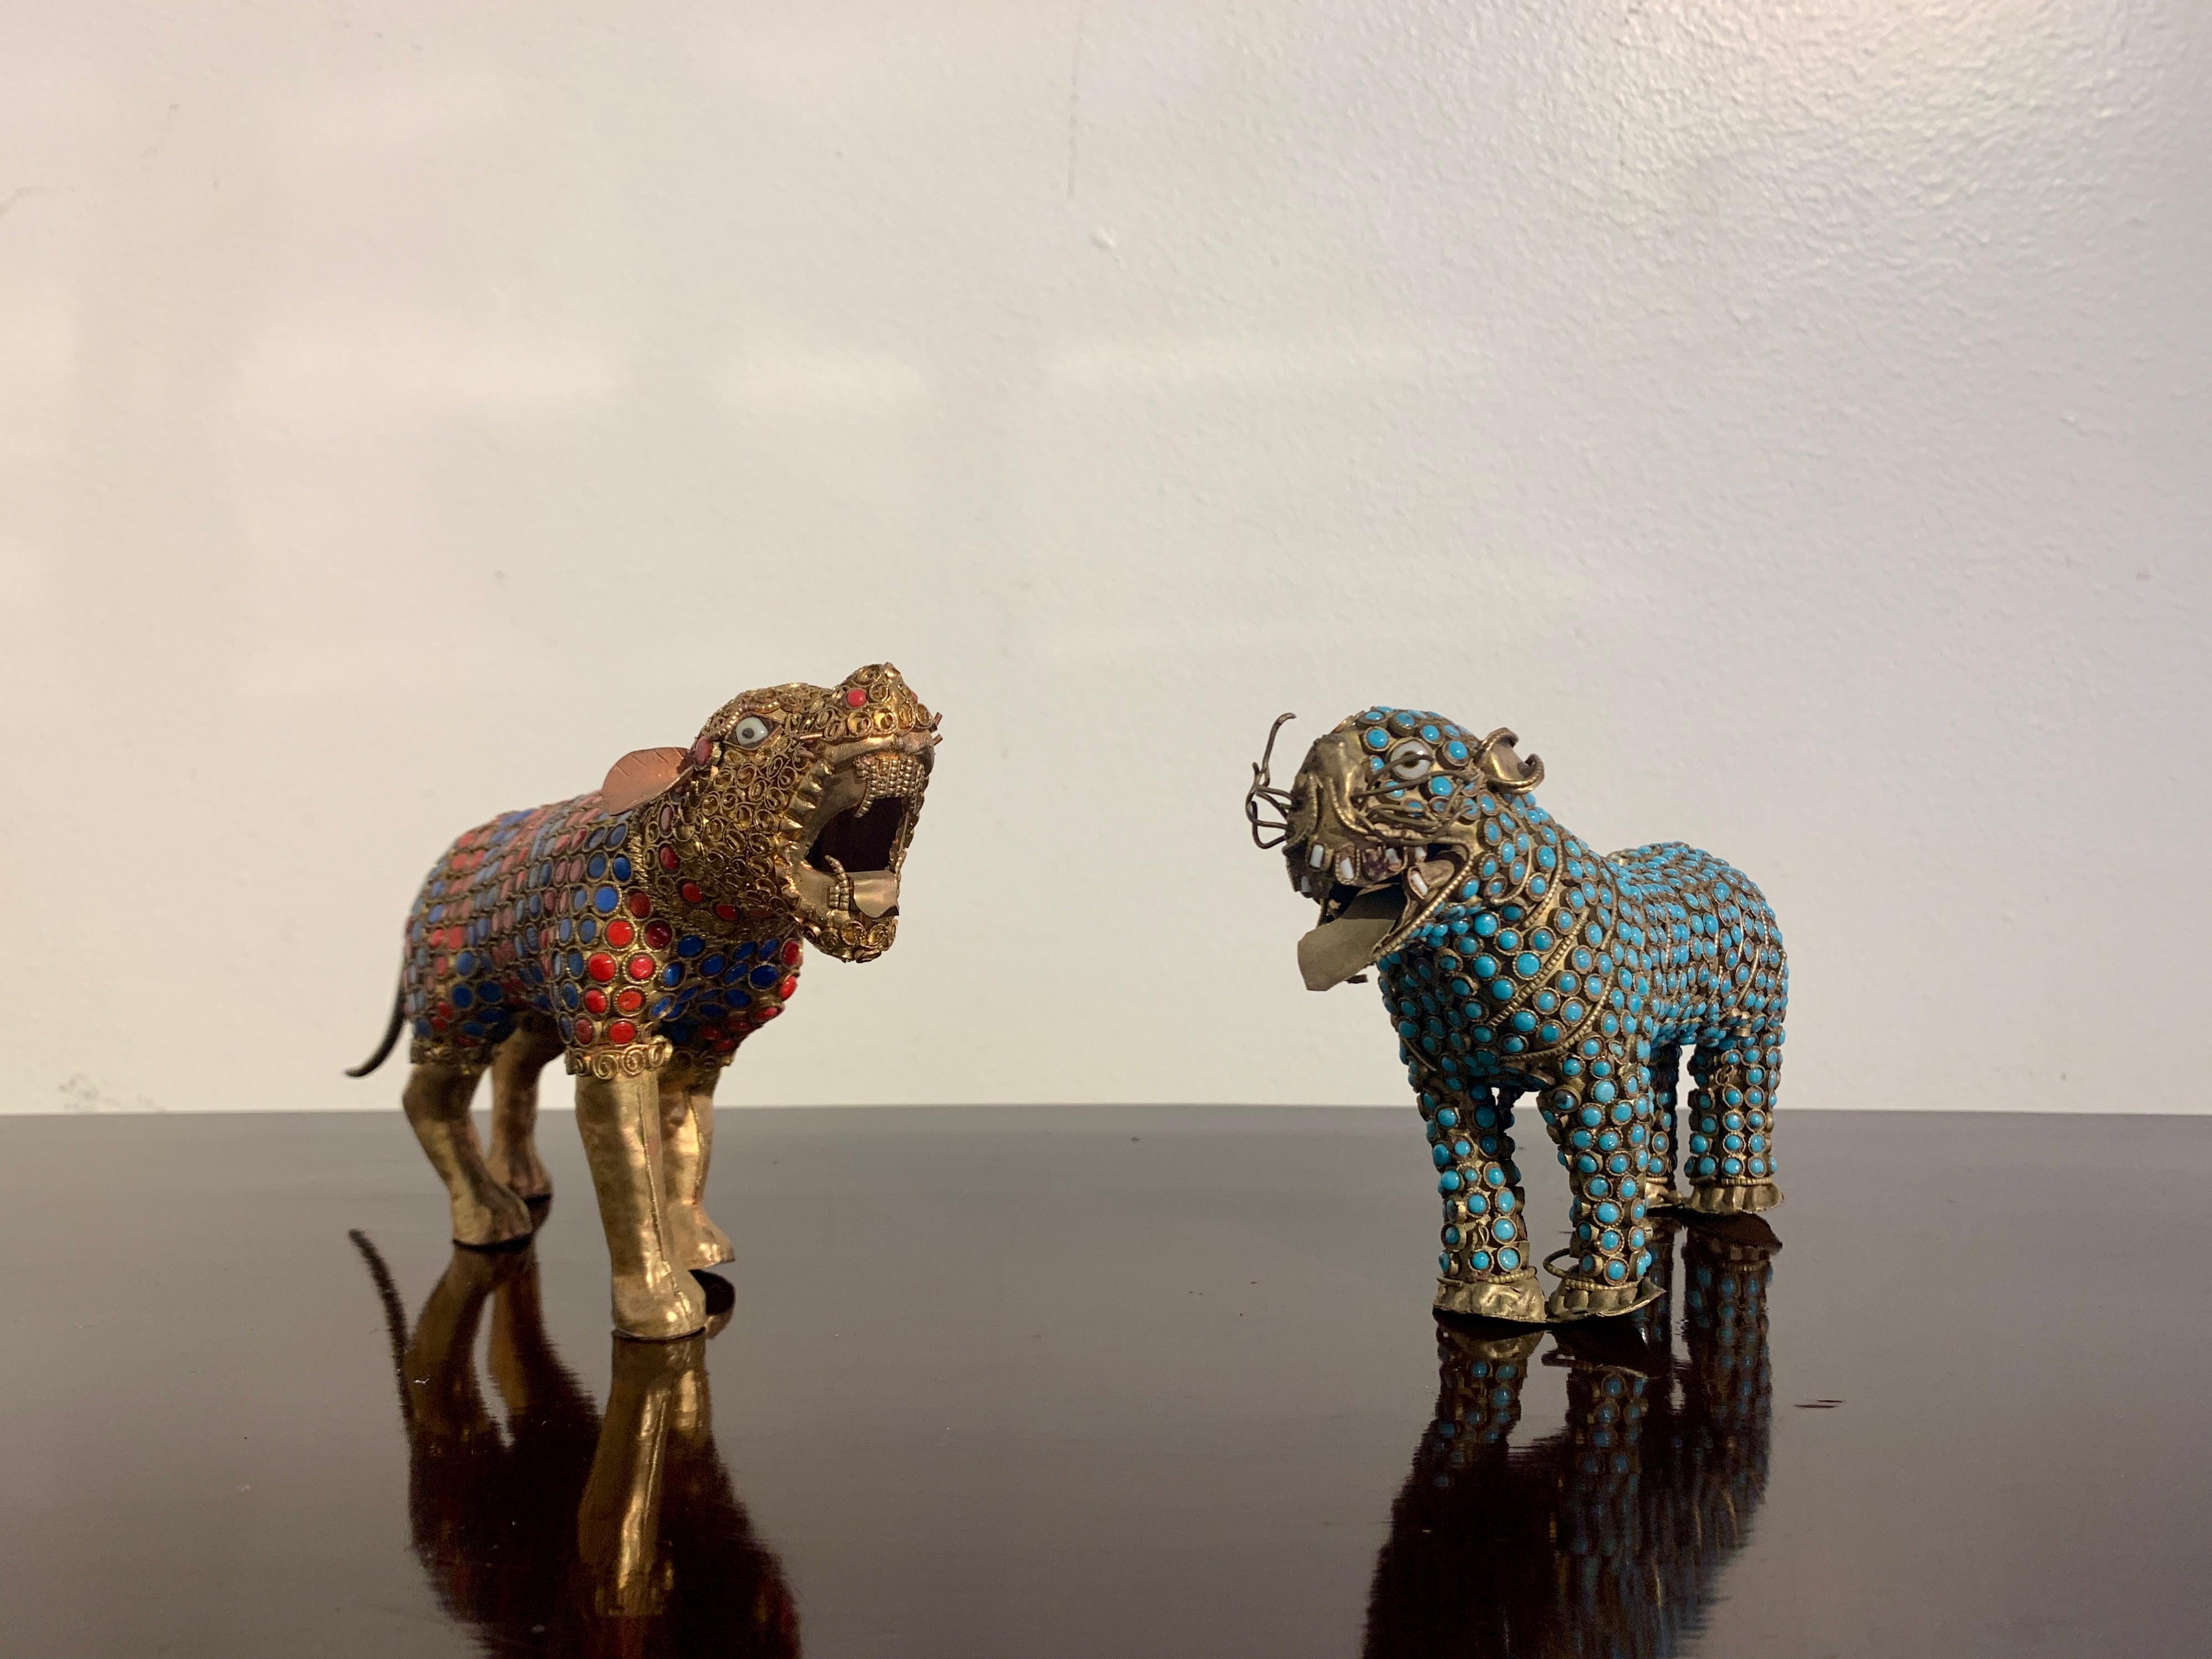 A delightful near pair of vintage Nepalese glass studded brass tigers, circa 1970's, Nepal.

One tiger standing foursquare, head extended, mouth open in a roar, with brass whiskers to the face. The body studded with blue glass bead imitating